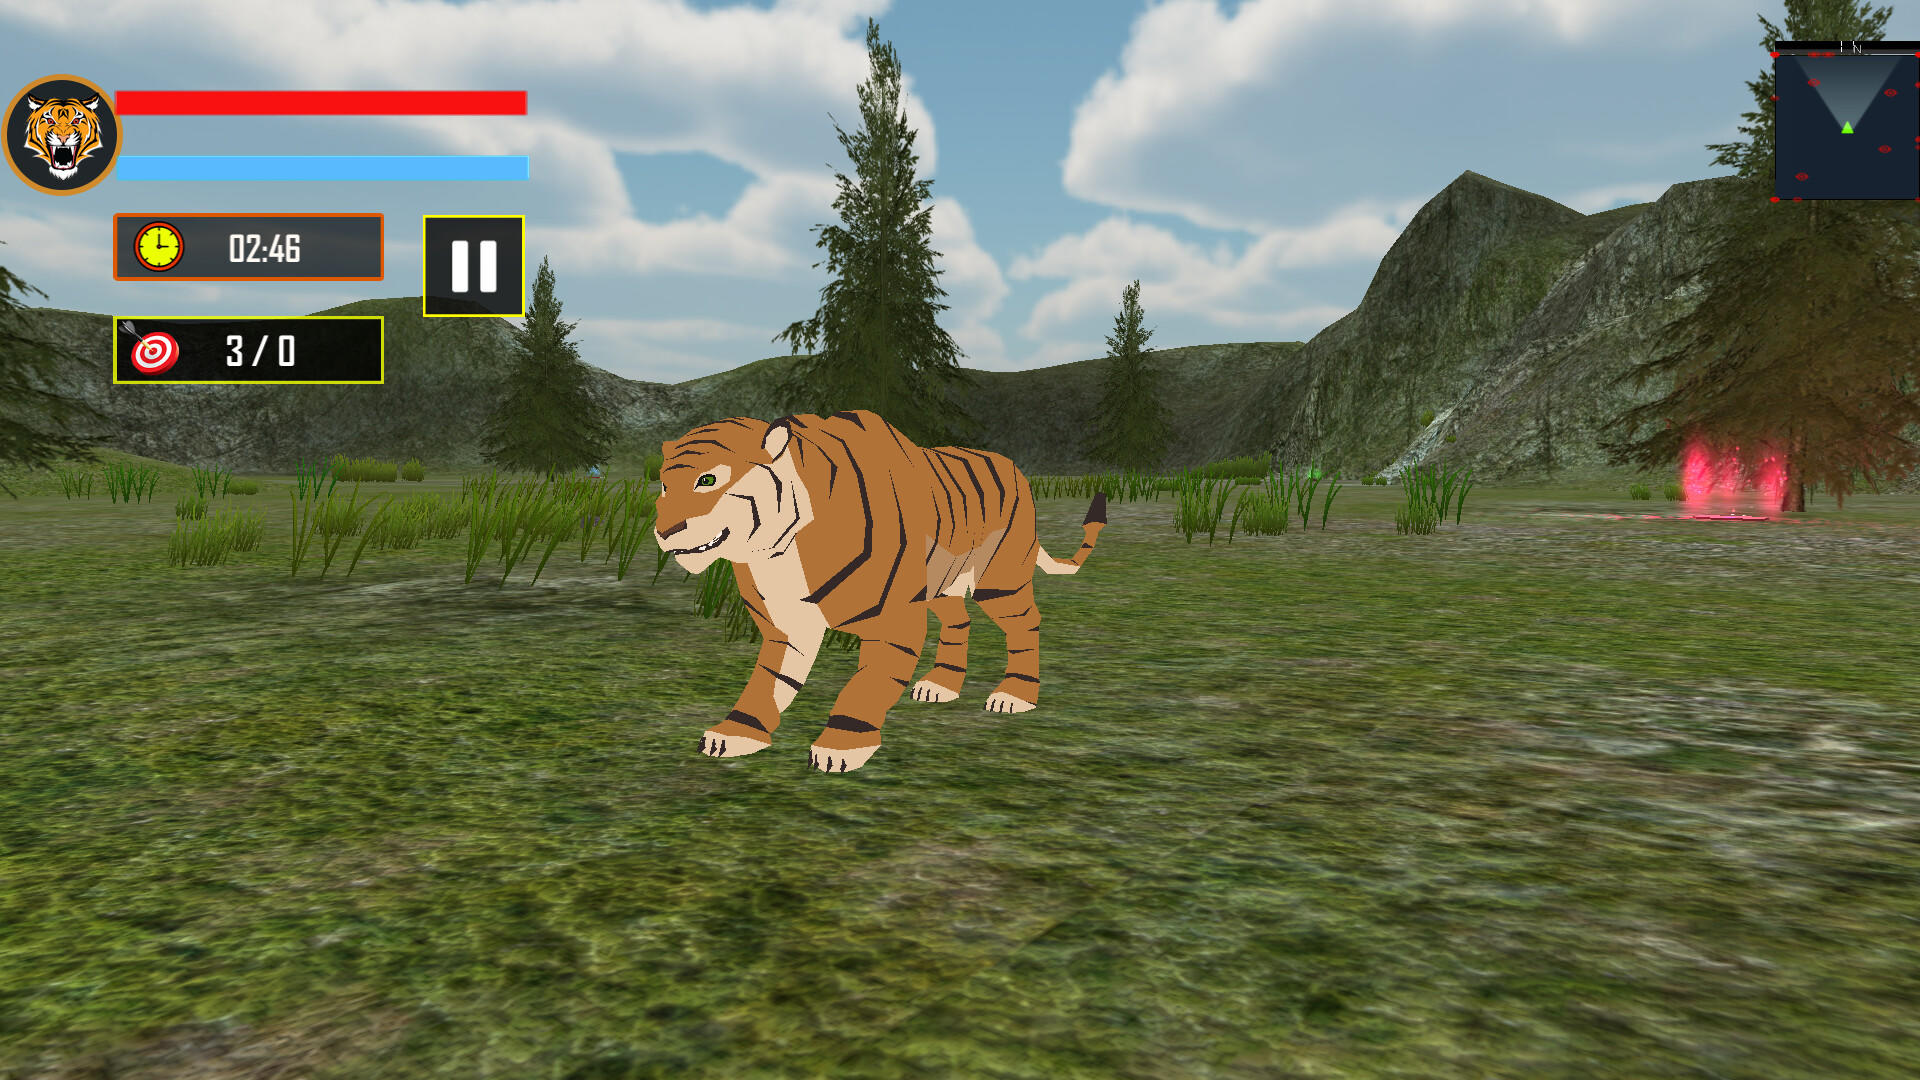 Let's be a Tiger screenshot game